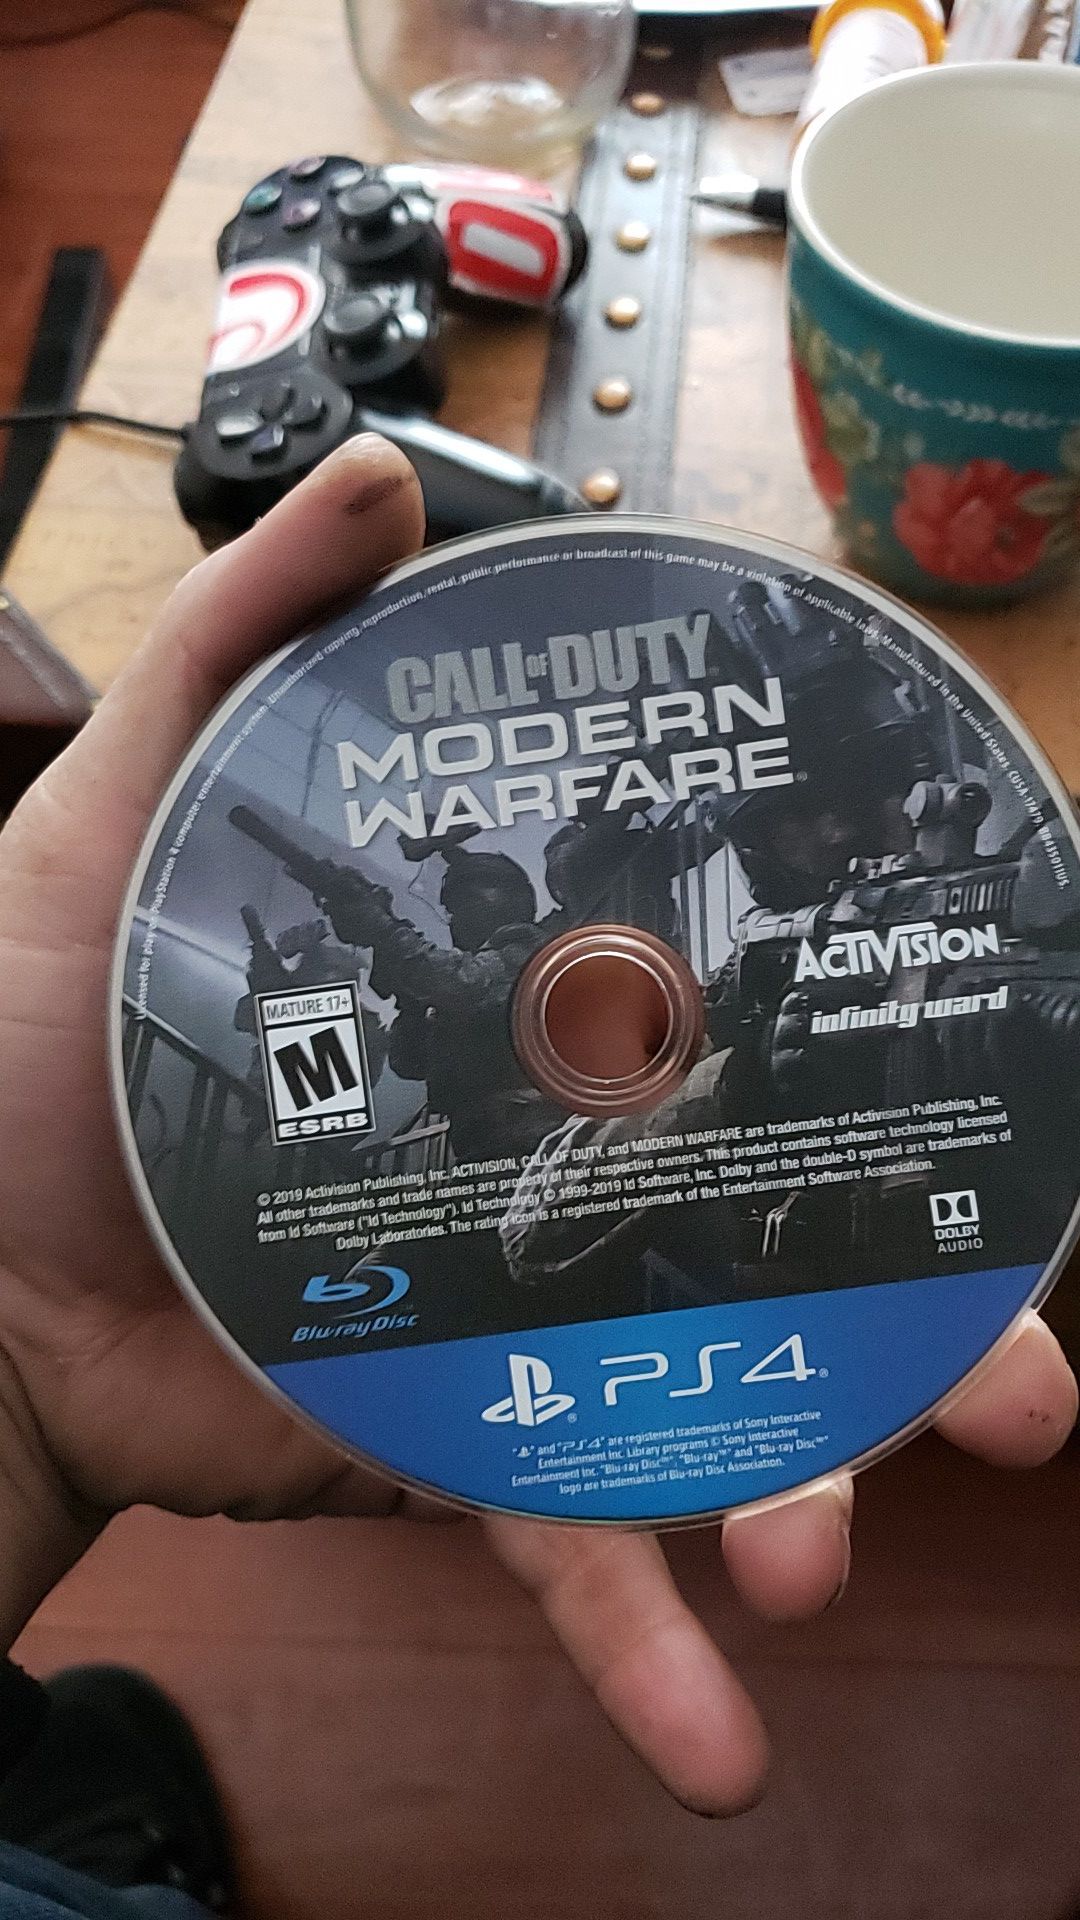 Call of duty modern warfare. Just the disk. No case